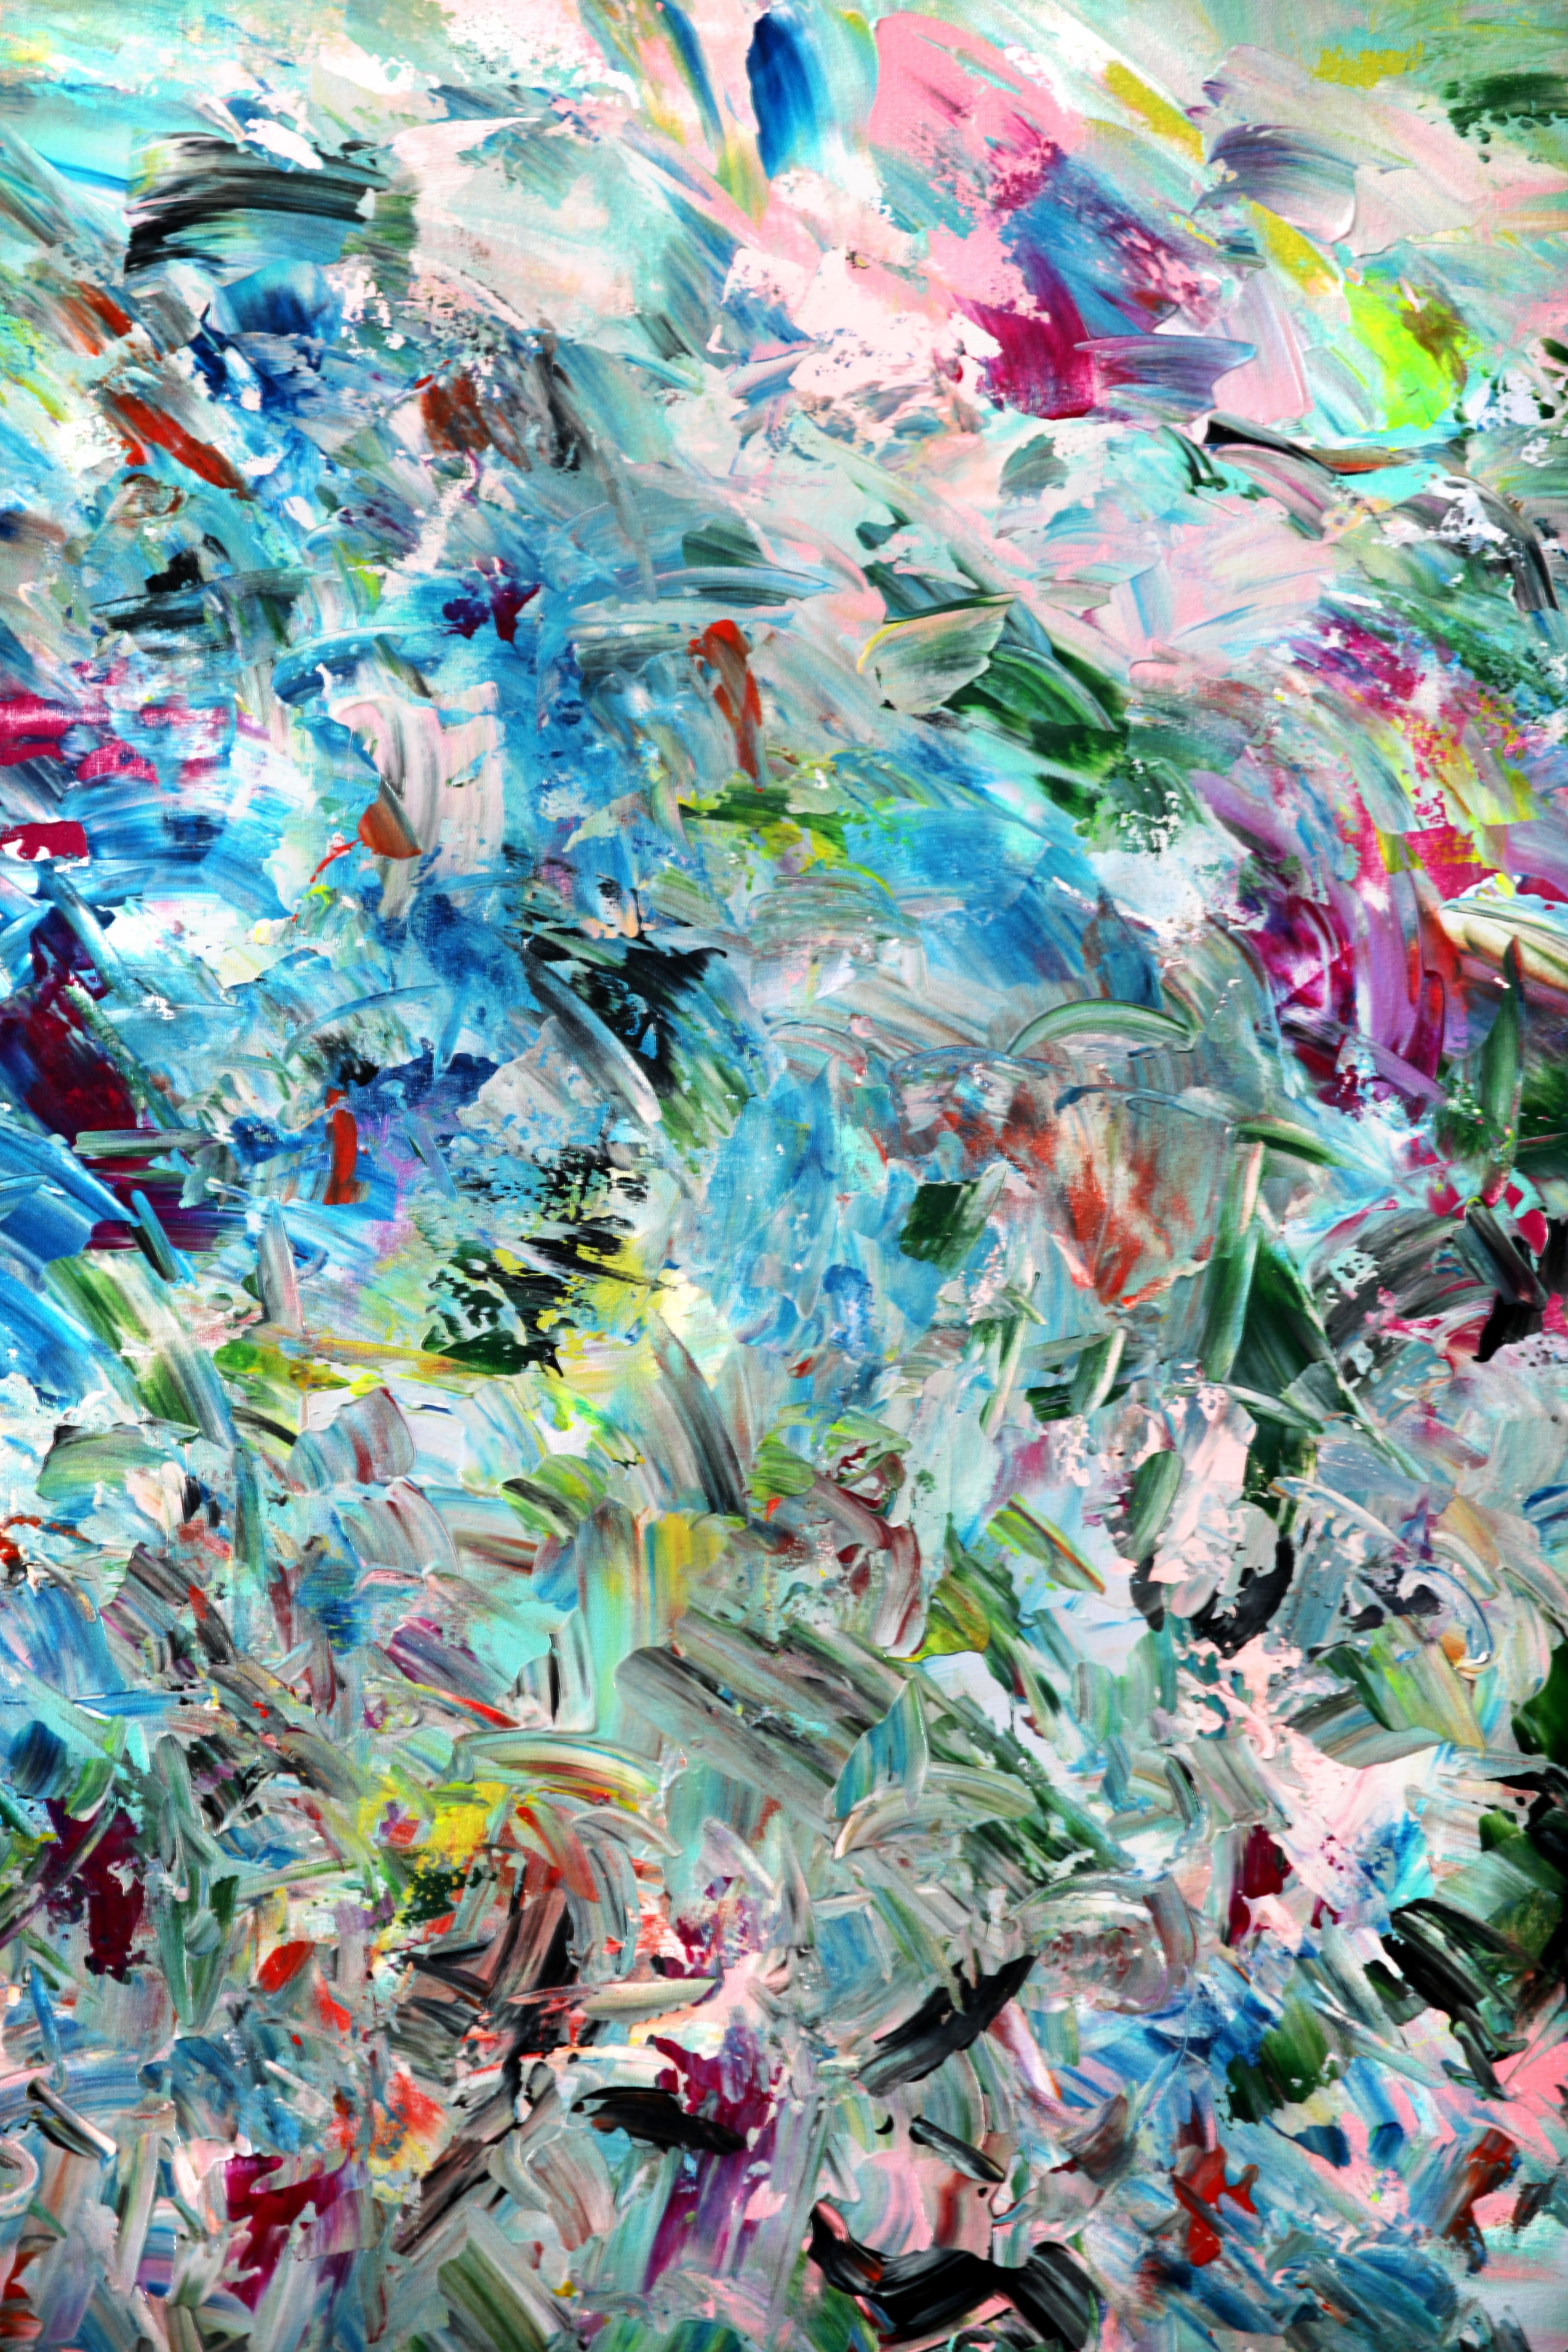 Invigorating Motion - Blue Abstract Painting by Estelle Asmodelle